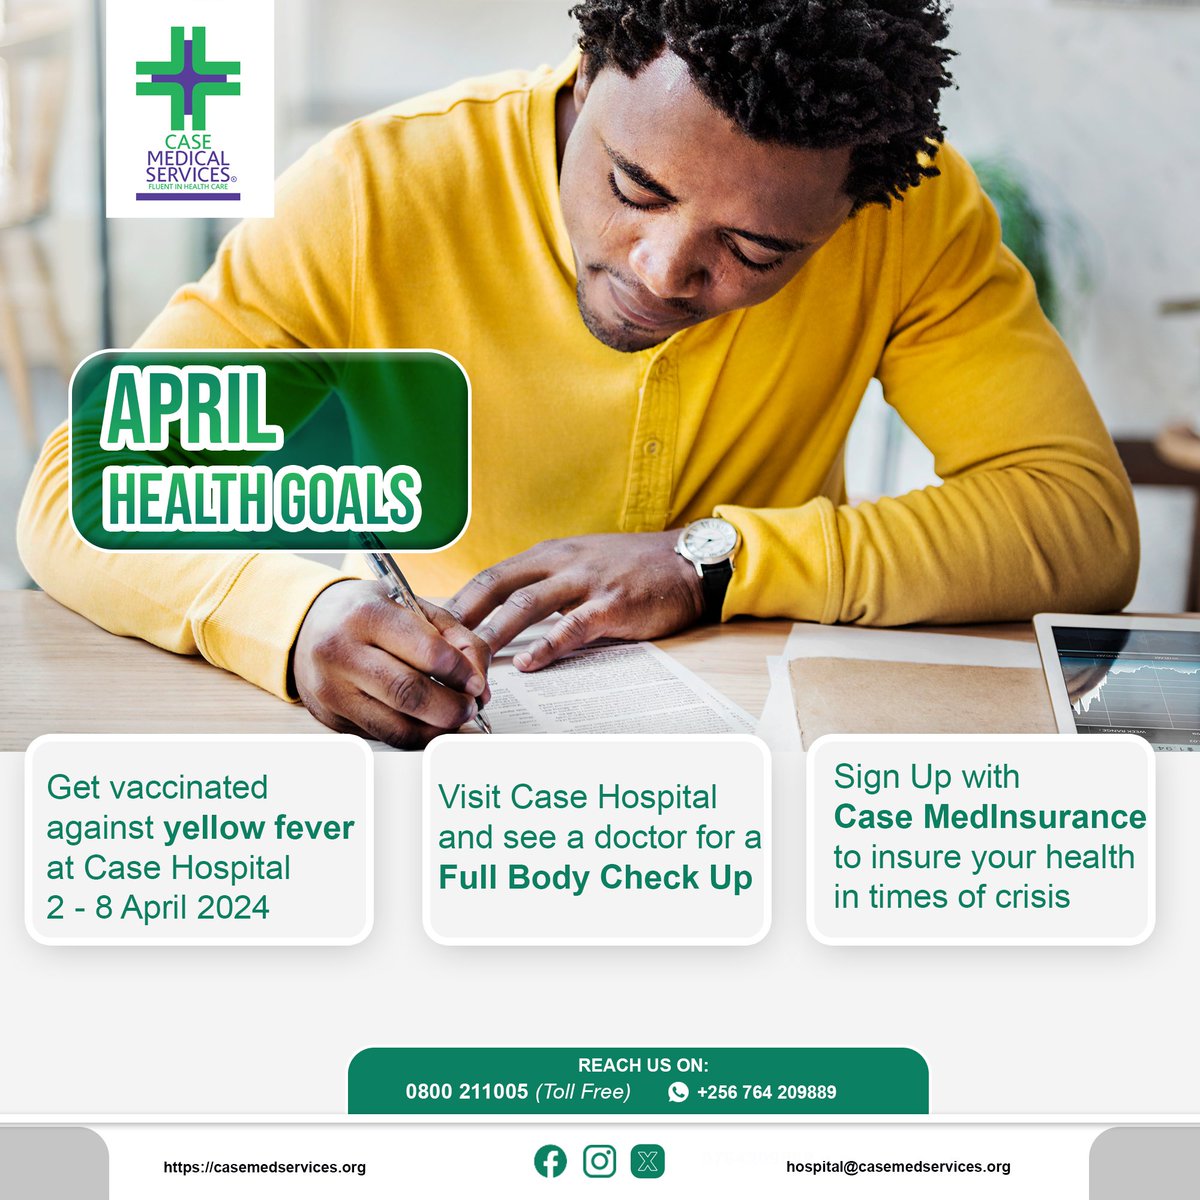 Hello! We're continuing with our April goals. Our priority remains your well-being, as healthy individuals are more productive. Ensure you're vaccinated, schedule a comprehensive health check-up, and enroll with Case Medinsurance today at bit.ly/3TlHtPf.